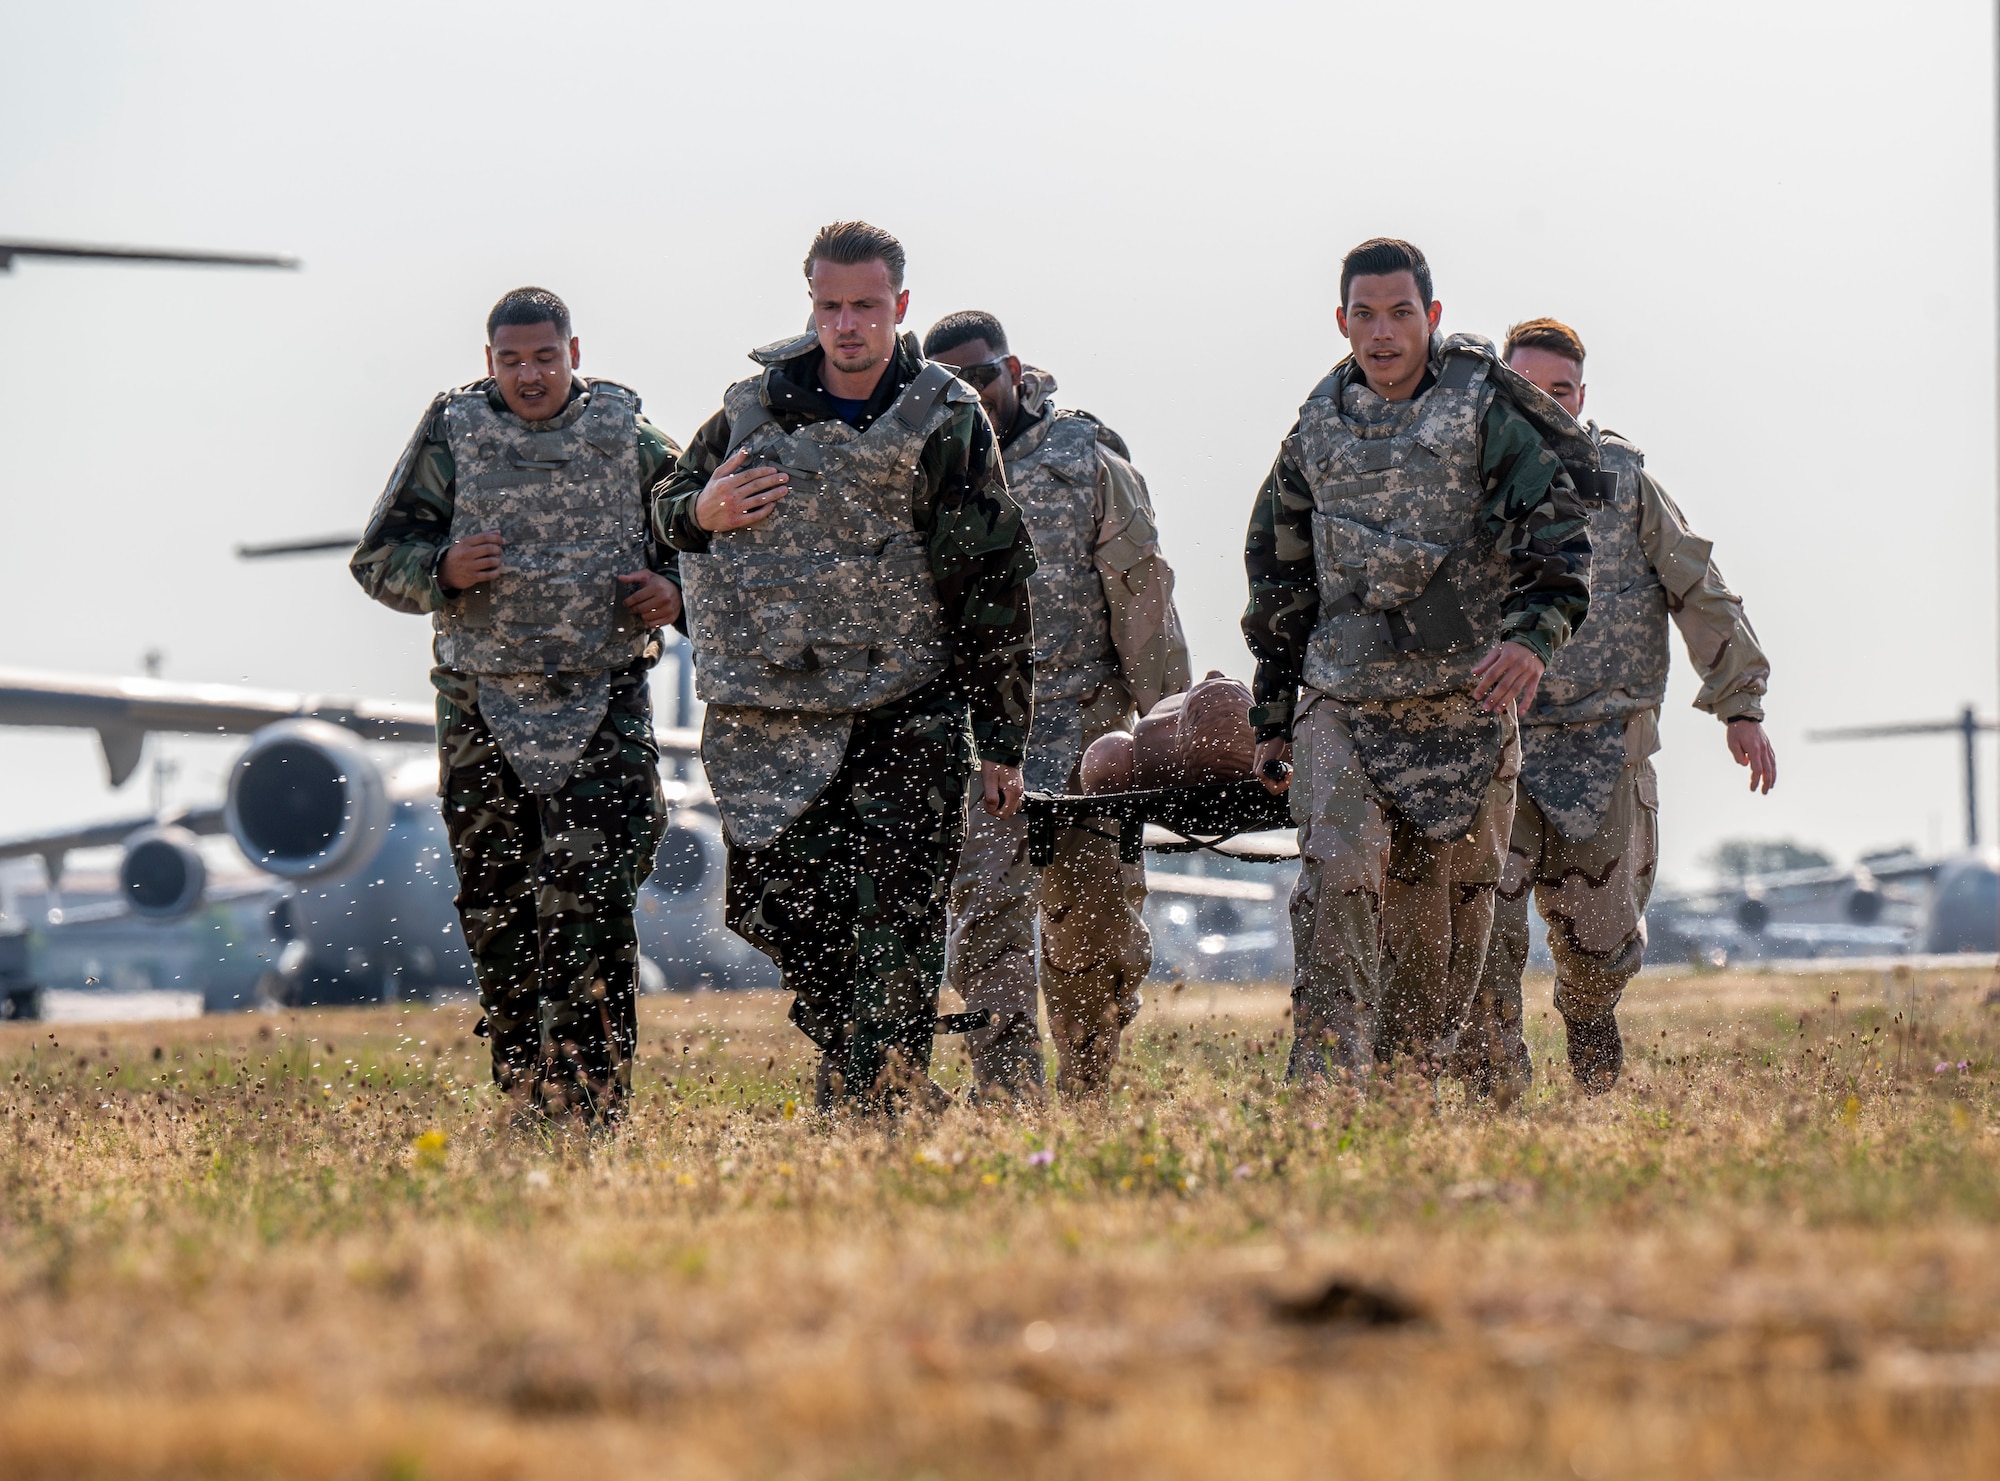 Members of the 940th Squadron, Royal Netherlands Air Force, perform a litter carry while under a simulated attack using water balloons during the 521st Air Mobility Operations Wing’s Mobility Rodeo at Ramstein Air Base, Germany, July 11, 2023.